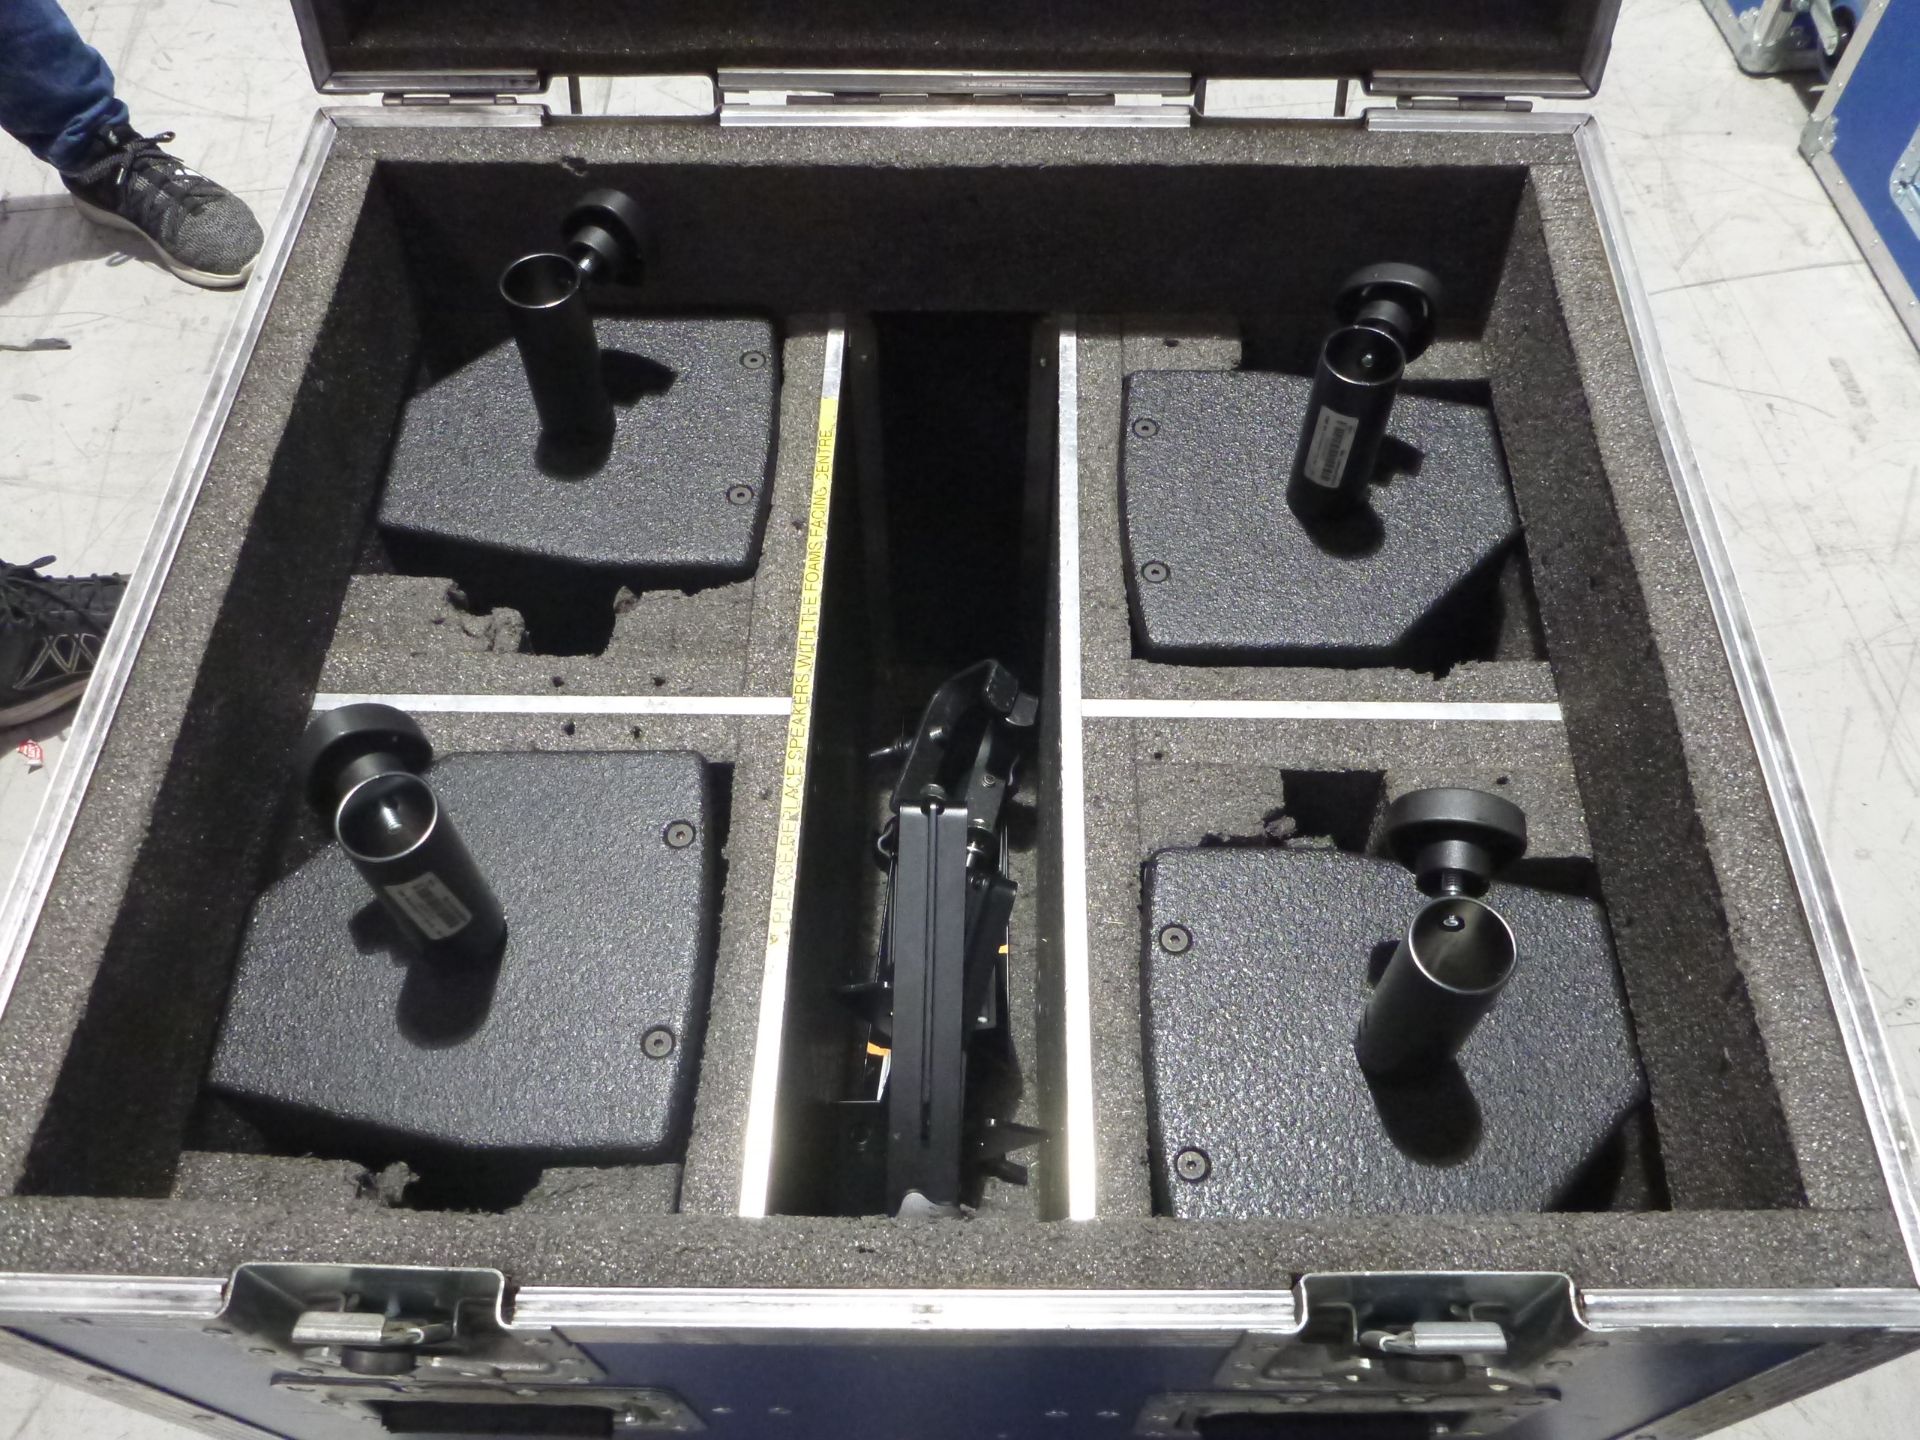 EM Acoustics EMS-61 Loundspeakers (Qty 4) In flight case with top hat, flying frame and safety - Image 8 of 10